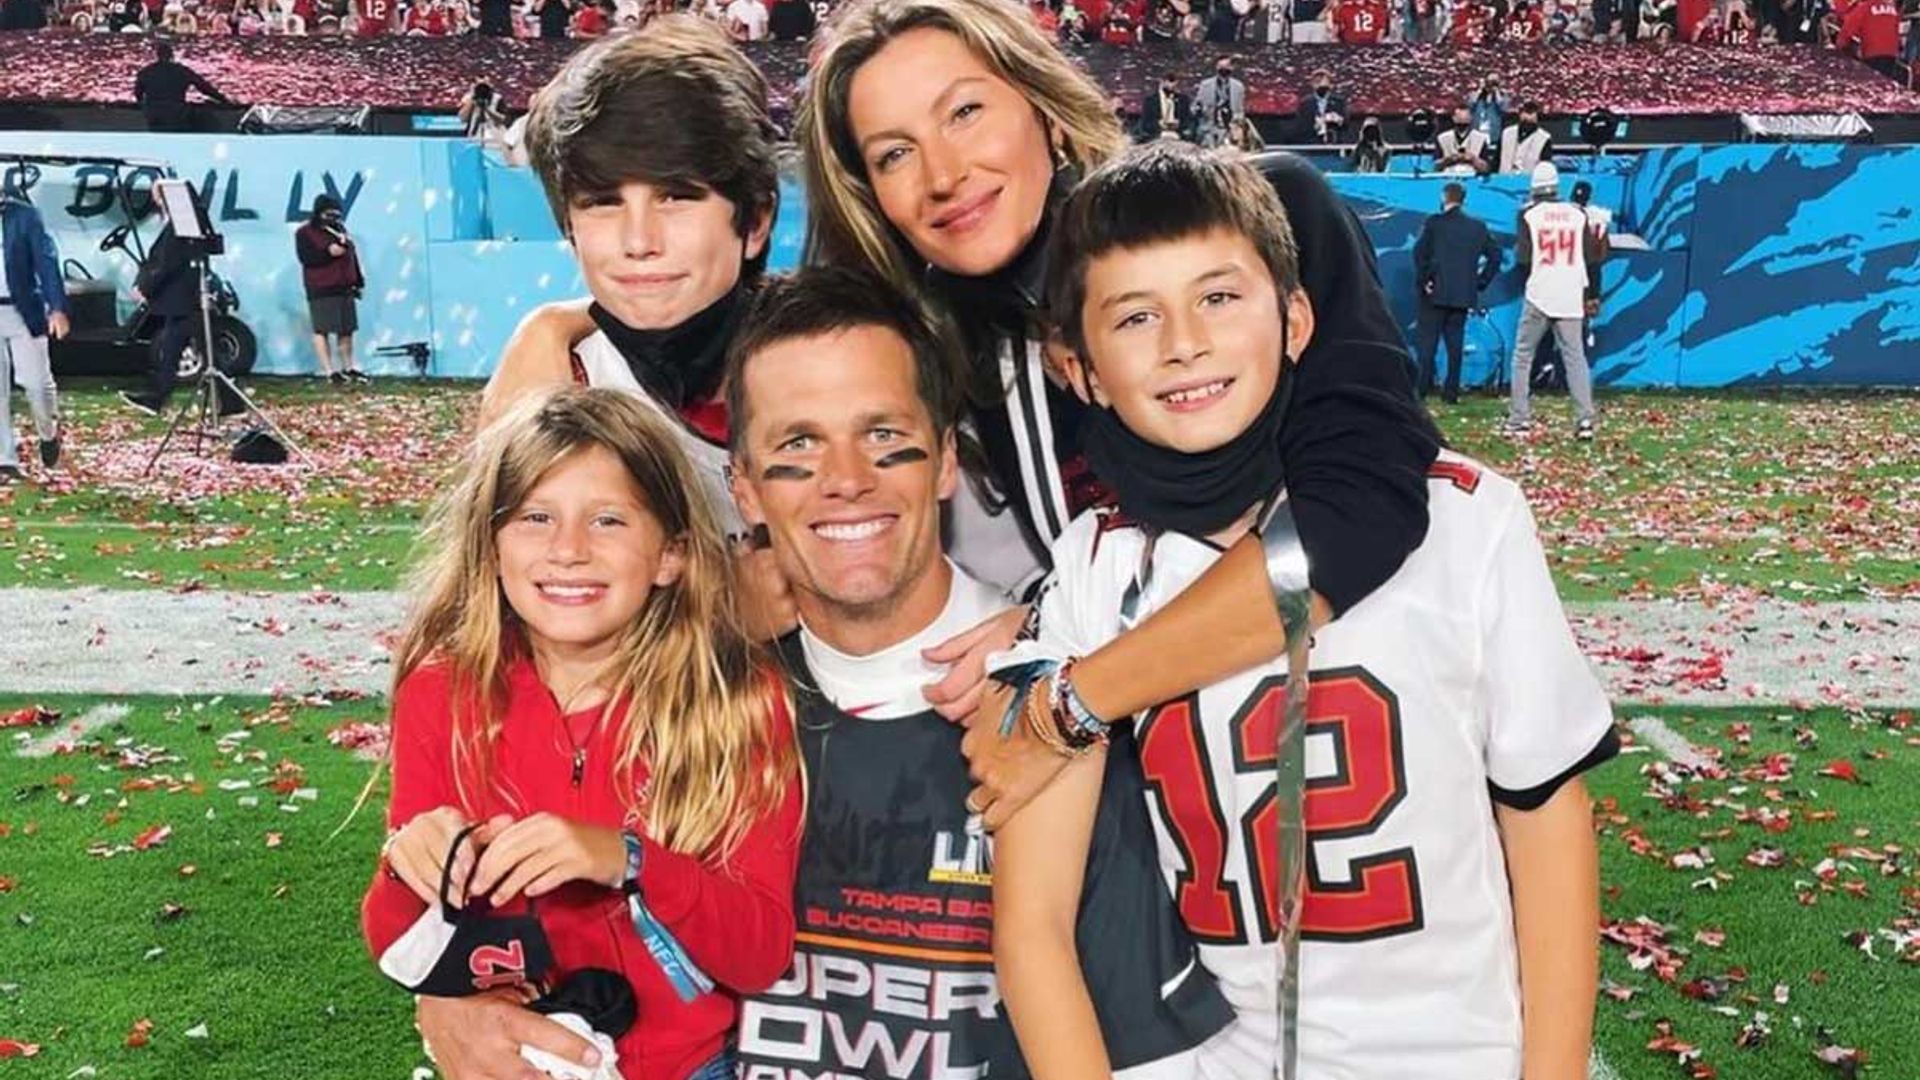 Tom Brady poses with entire family after his historic Super Bowl